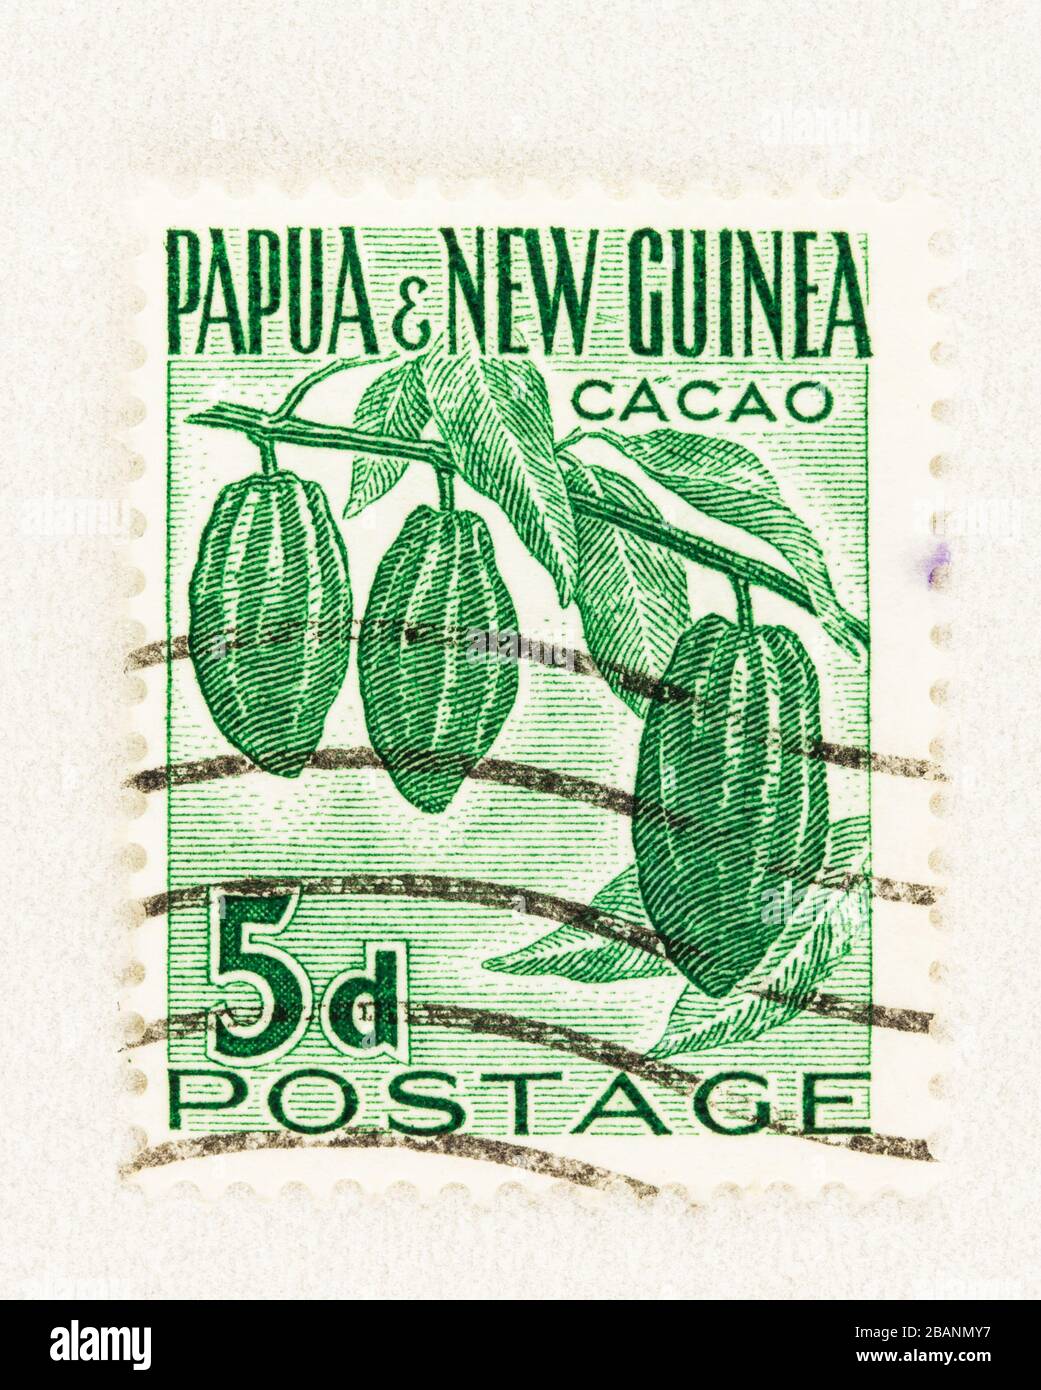 SEATTLE WASHINGTON - March 27, 2020: Close up of used Papua and New Guinea stamp featuring the pods of Cacao on tree. Scott # 141 Stock Photo